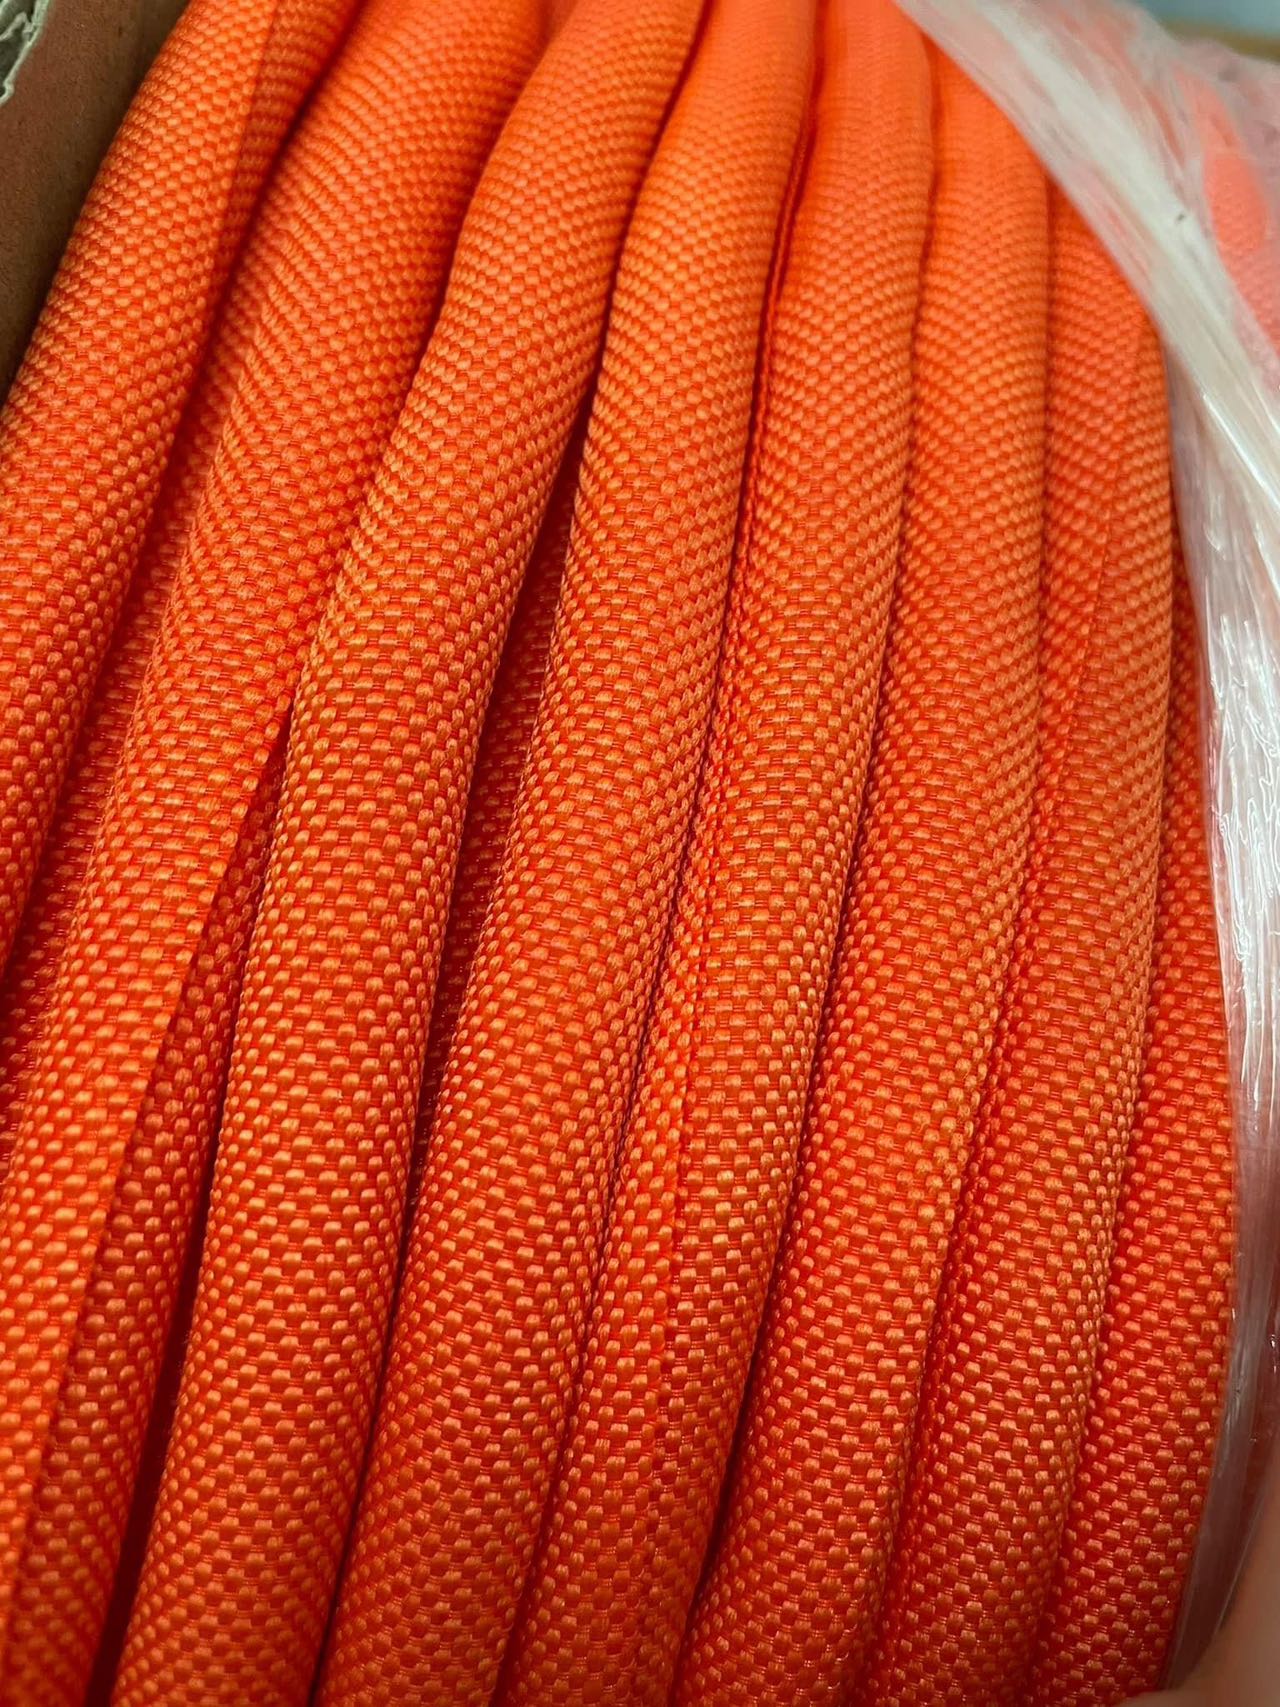 PETV Wraparound braided sleeving for automotive wire assembly